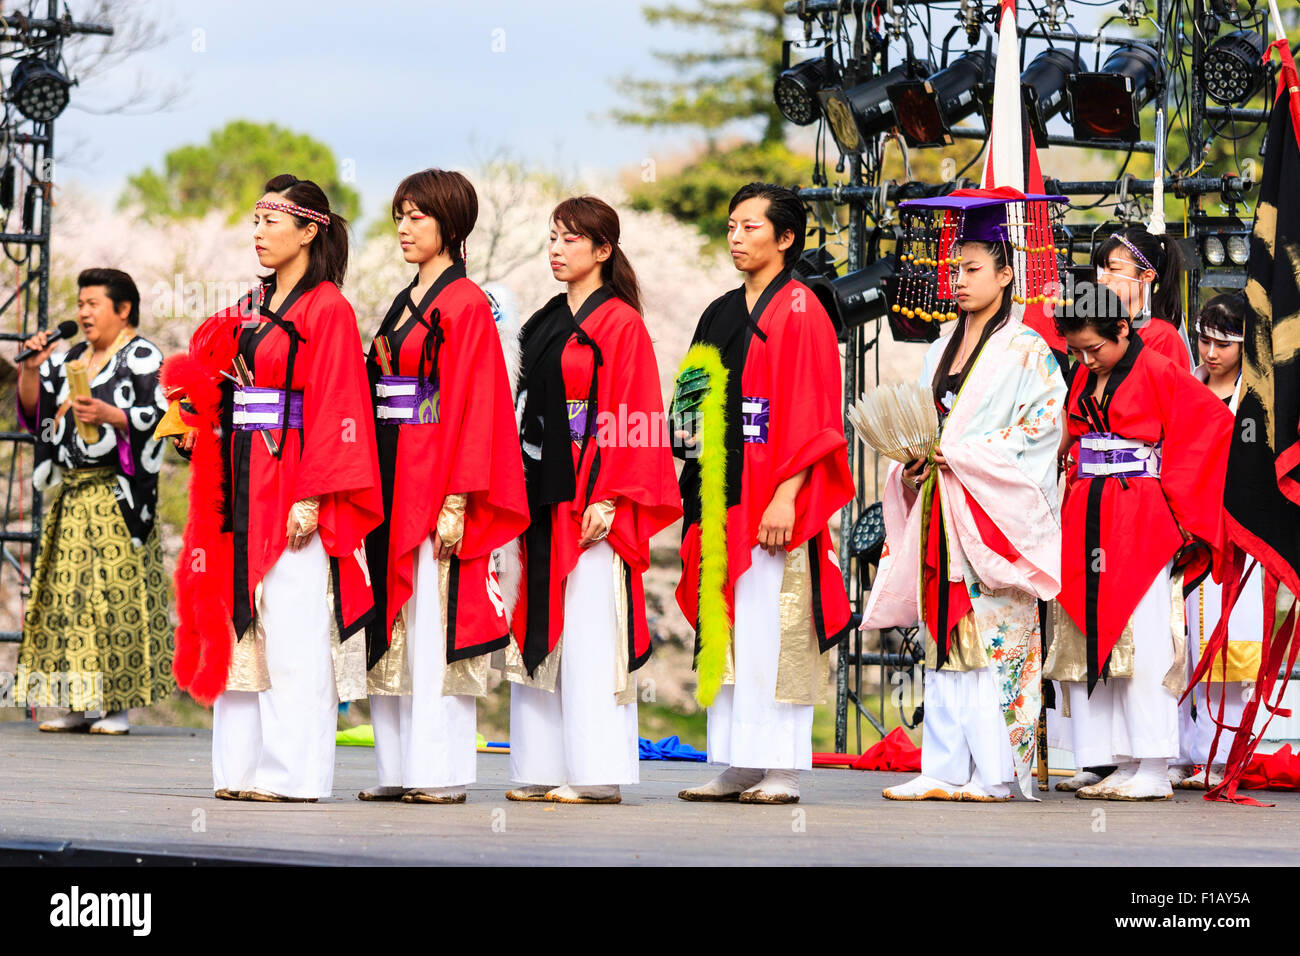 Japanese Yosakoi dance festival. Row of dancers wearing red cloaks with Princess in the middle standing on outdoor stage during historical dance. Stock Photo